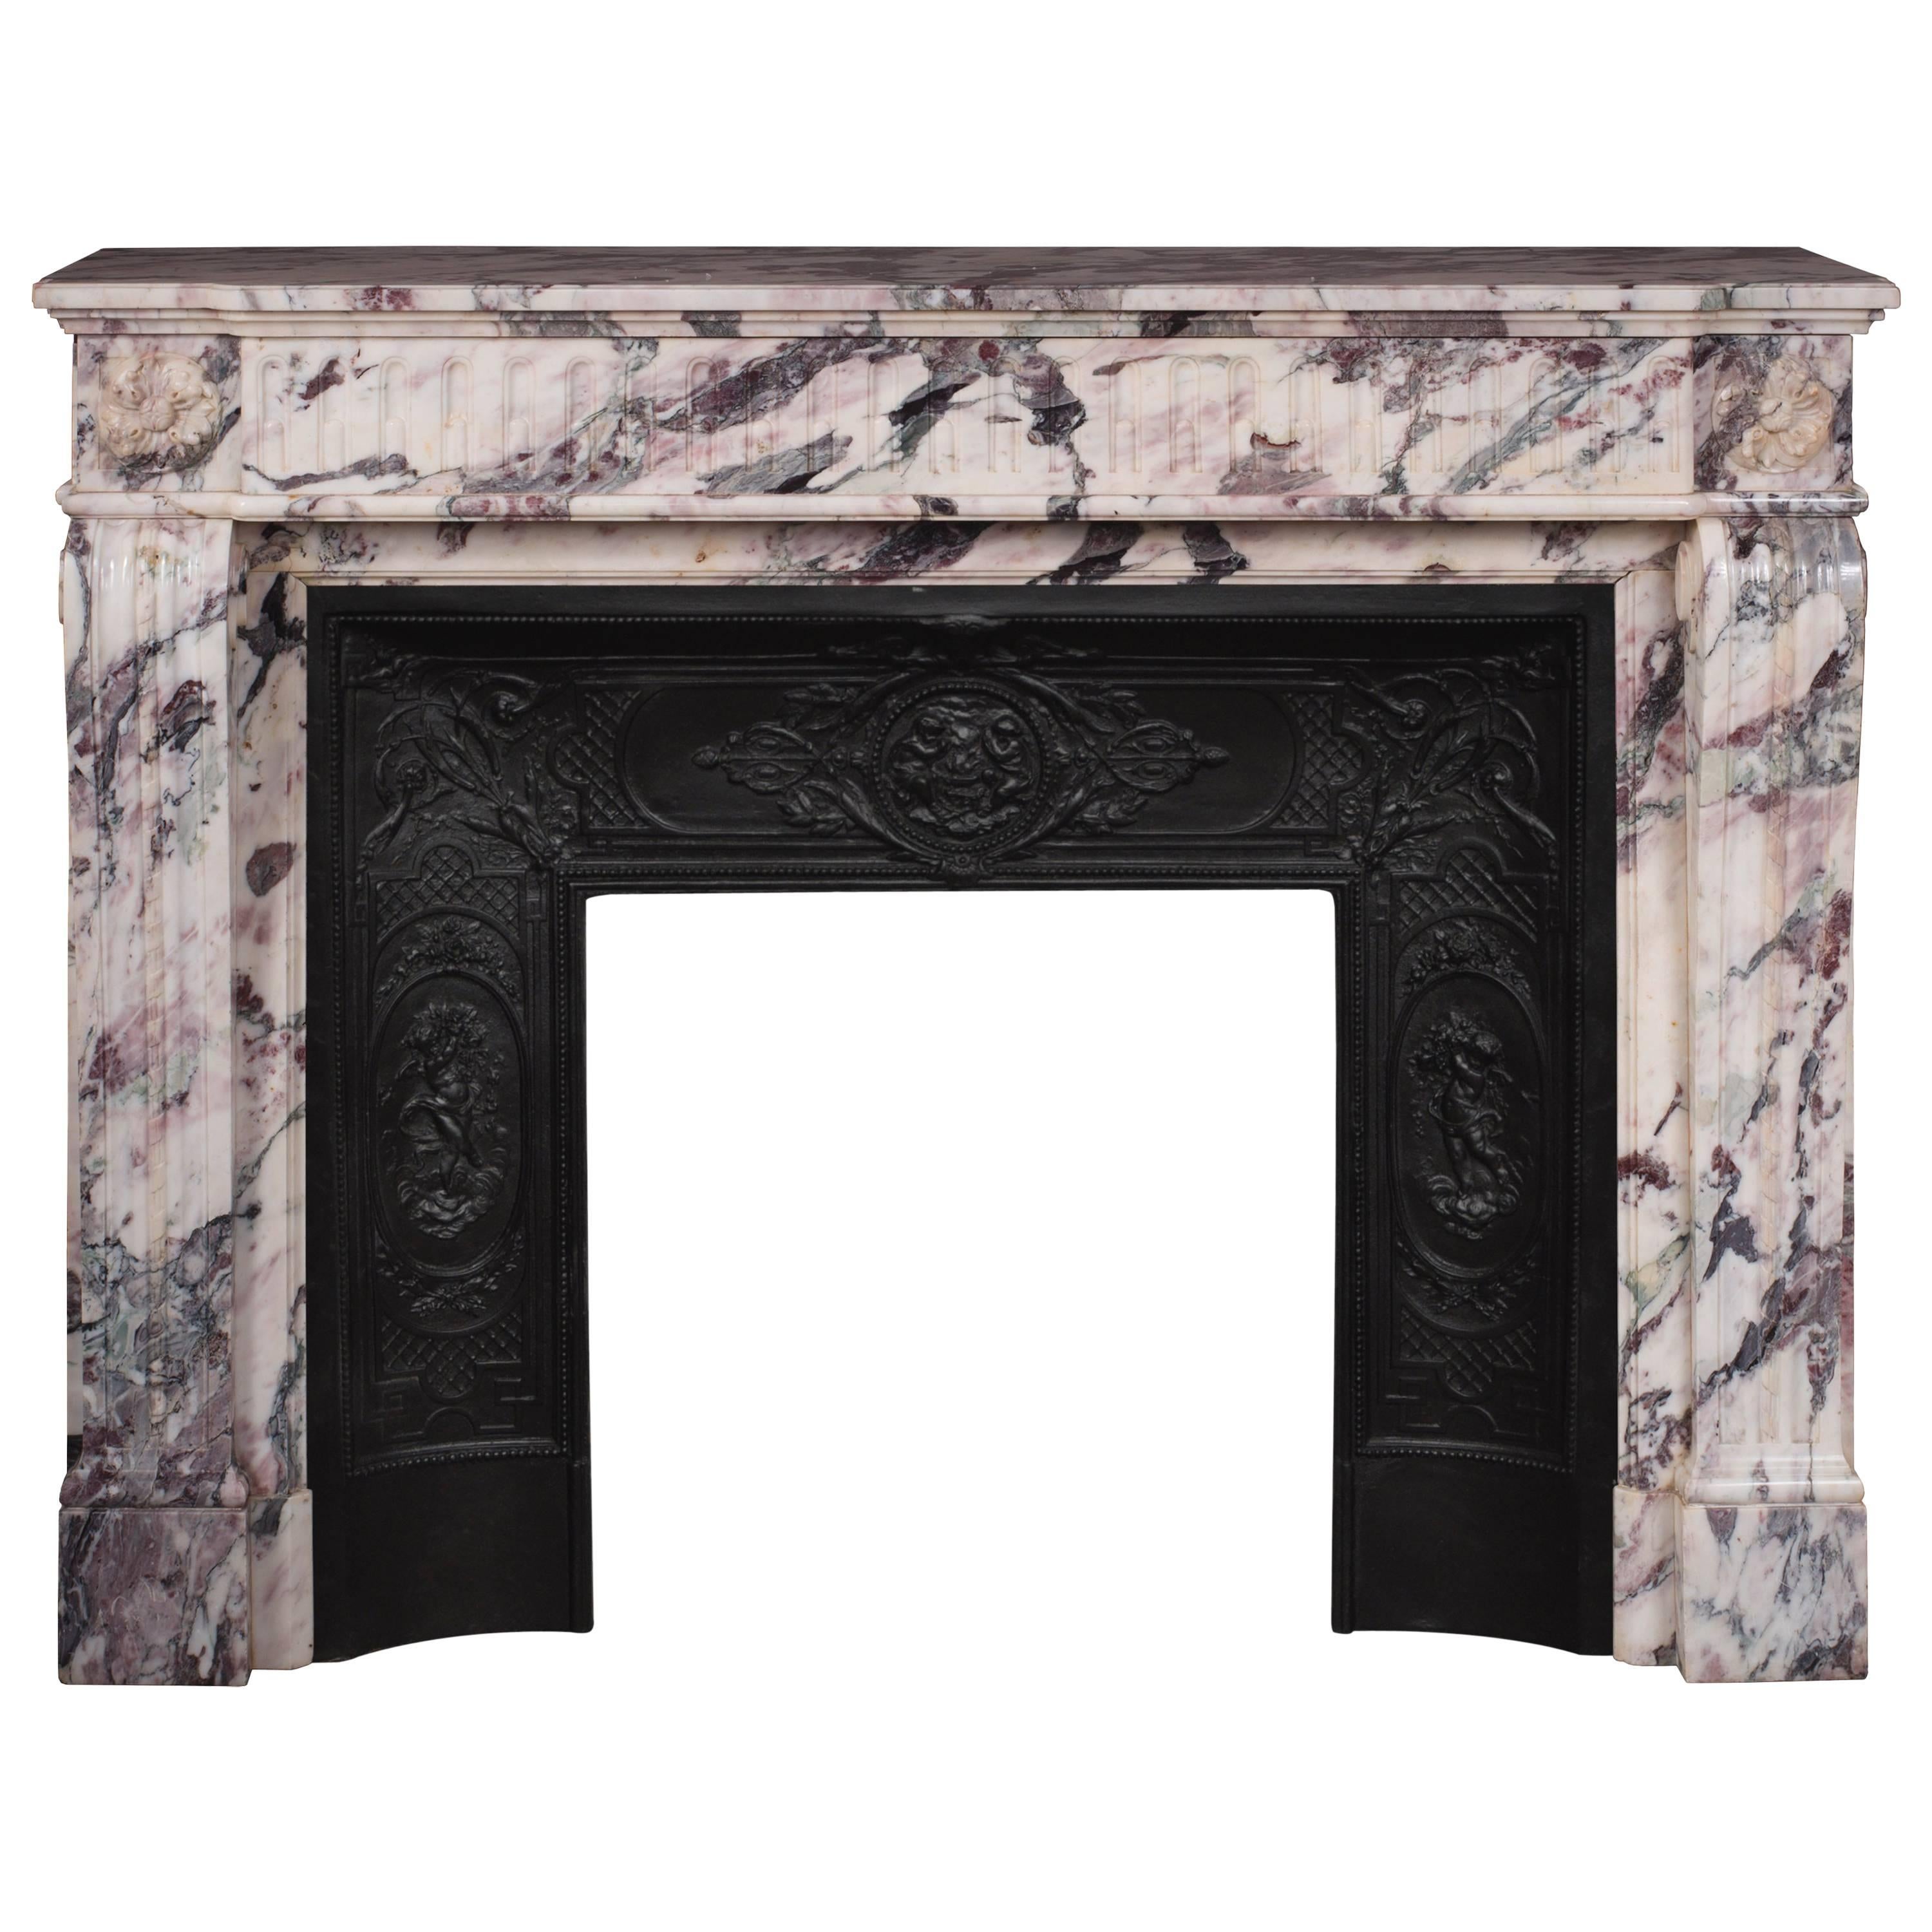 Louis XVI Style Fireplace with Flutings Decor in Violet Breccia Marble For Sale